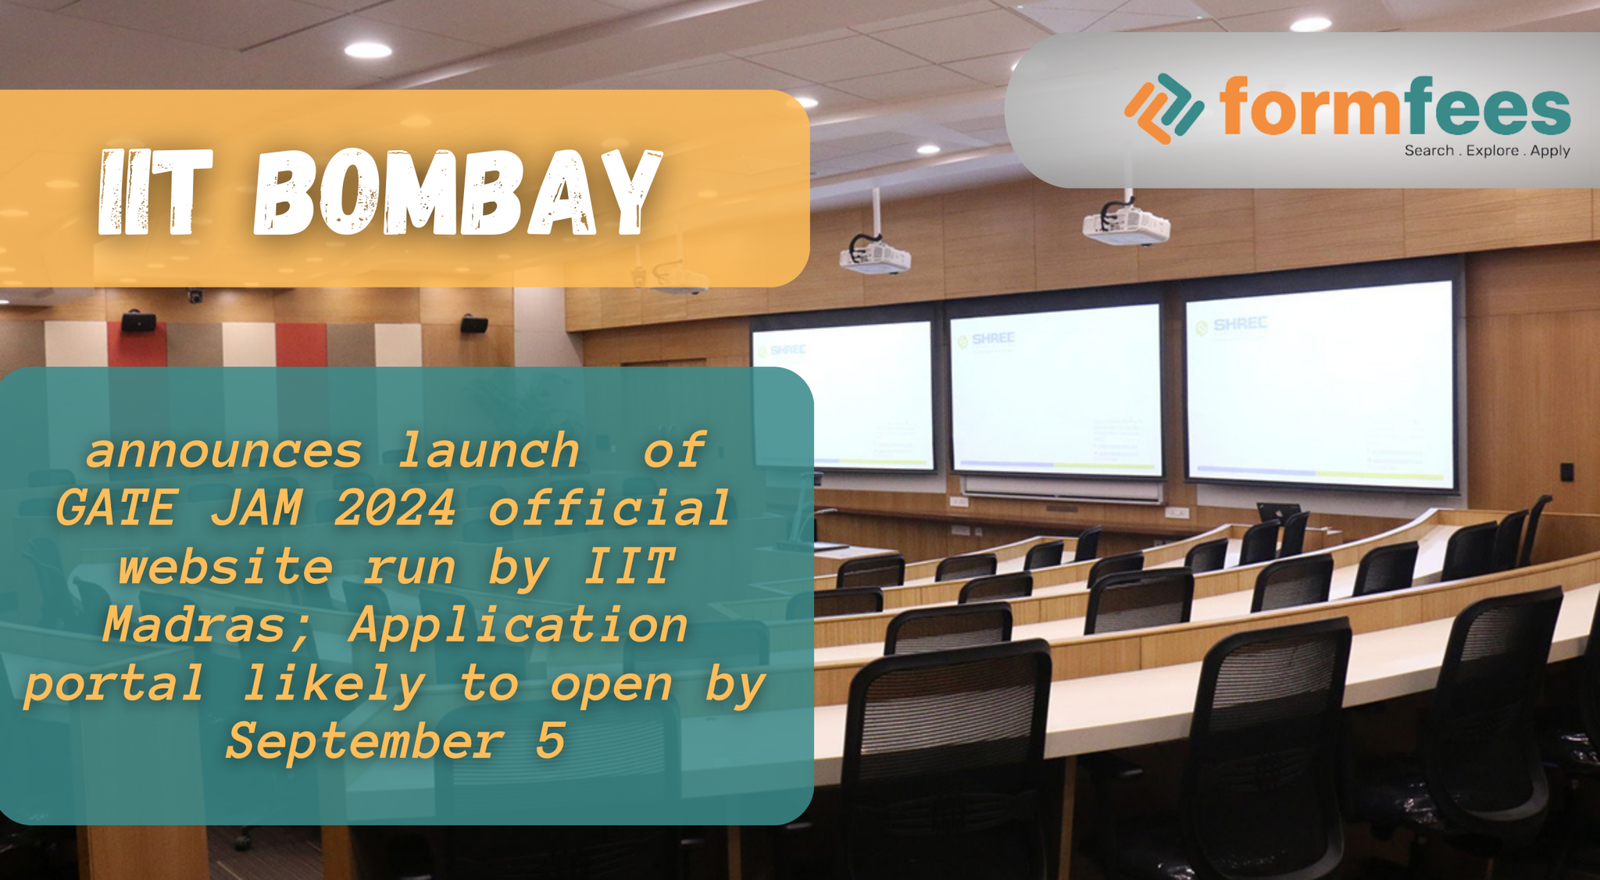 IIT Bombay Announces Launch of GATE JAM 2024 Official Website Run By